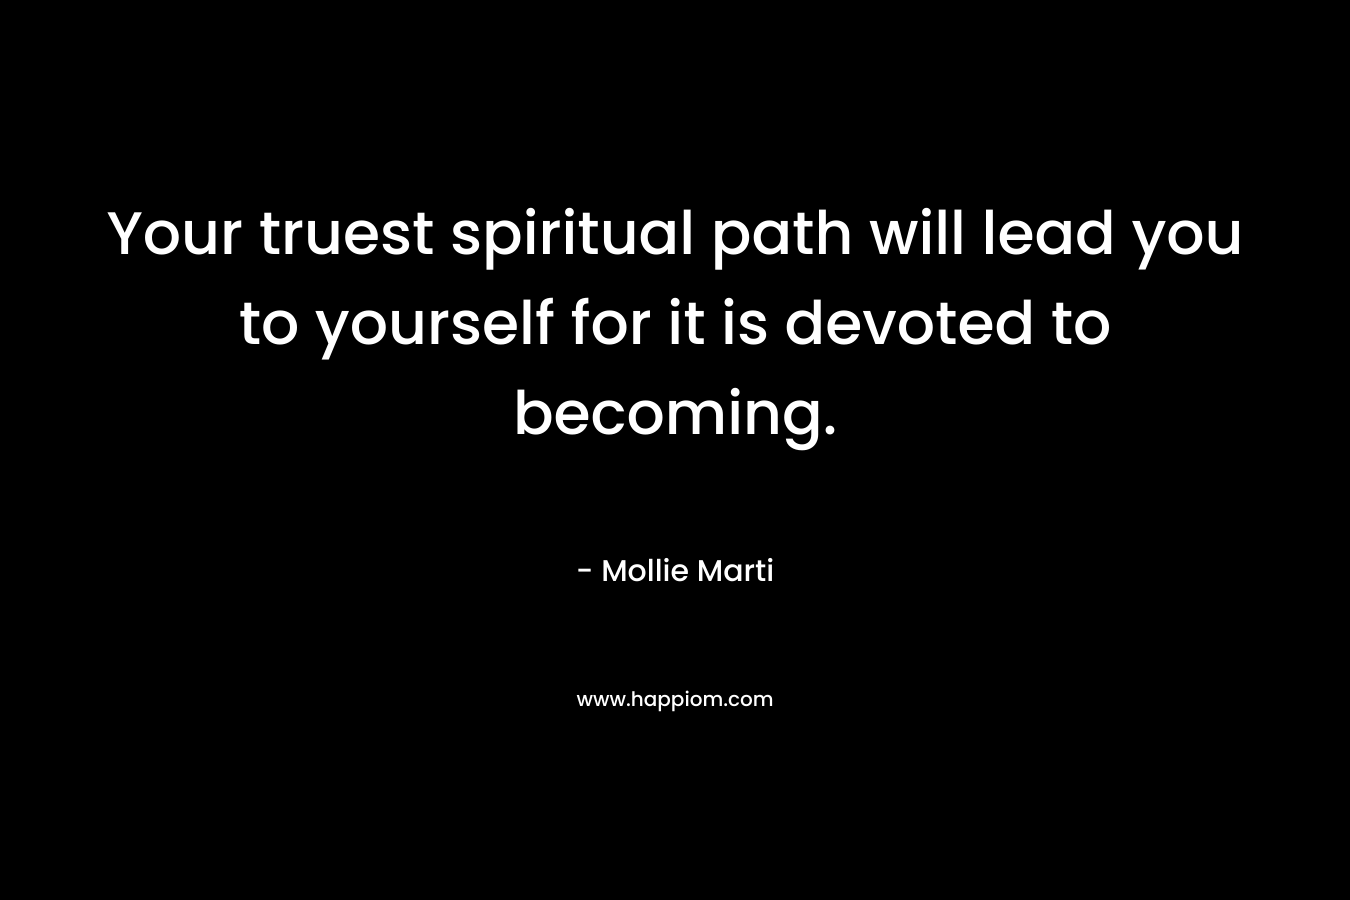 Your truest spiritual path will lead you to yourself for it is devoted to becoming. – Mollie Marti